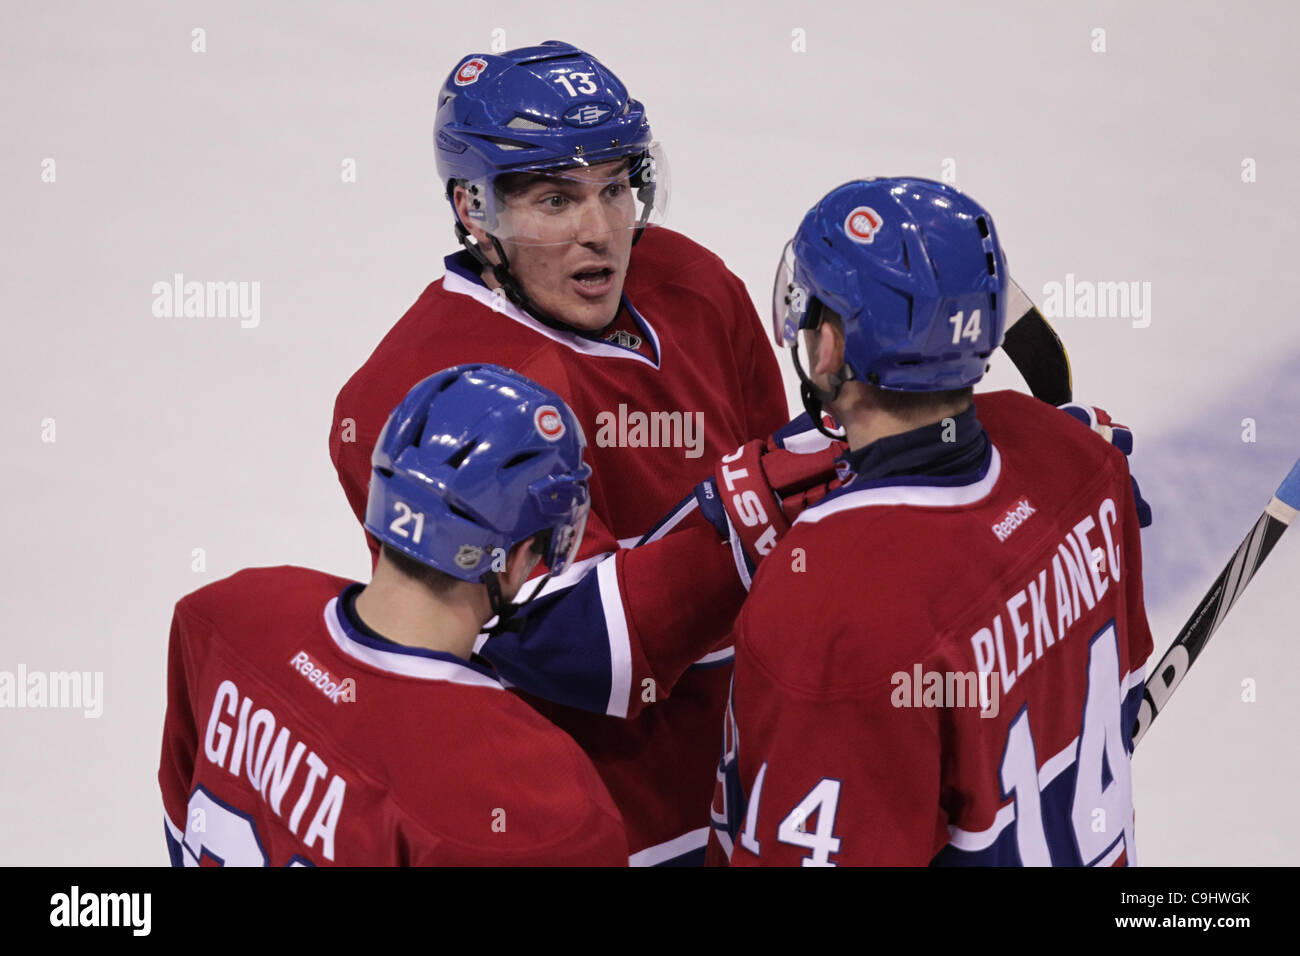 Jan. 7, 2012 - Montreal, Quebec, Canada - Montreal Canadiens forward Michael Cammalleri(13) discusses with Montreal Canadiens forward Tomas Plekanec (14) and Montreal Canadiens forward Brian Gionta (21) in first period action during the Montreal Canadiens' game against the Tampa Bay Lightning at Bel Stock Photo